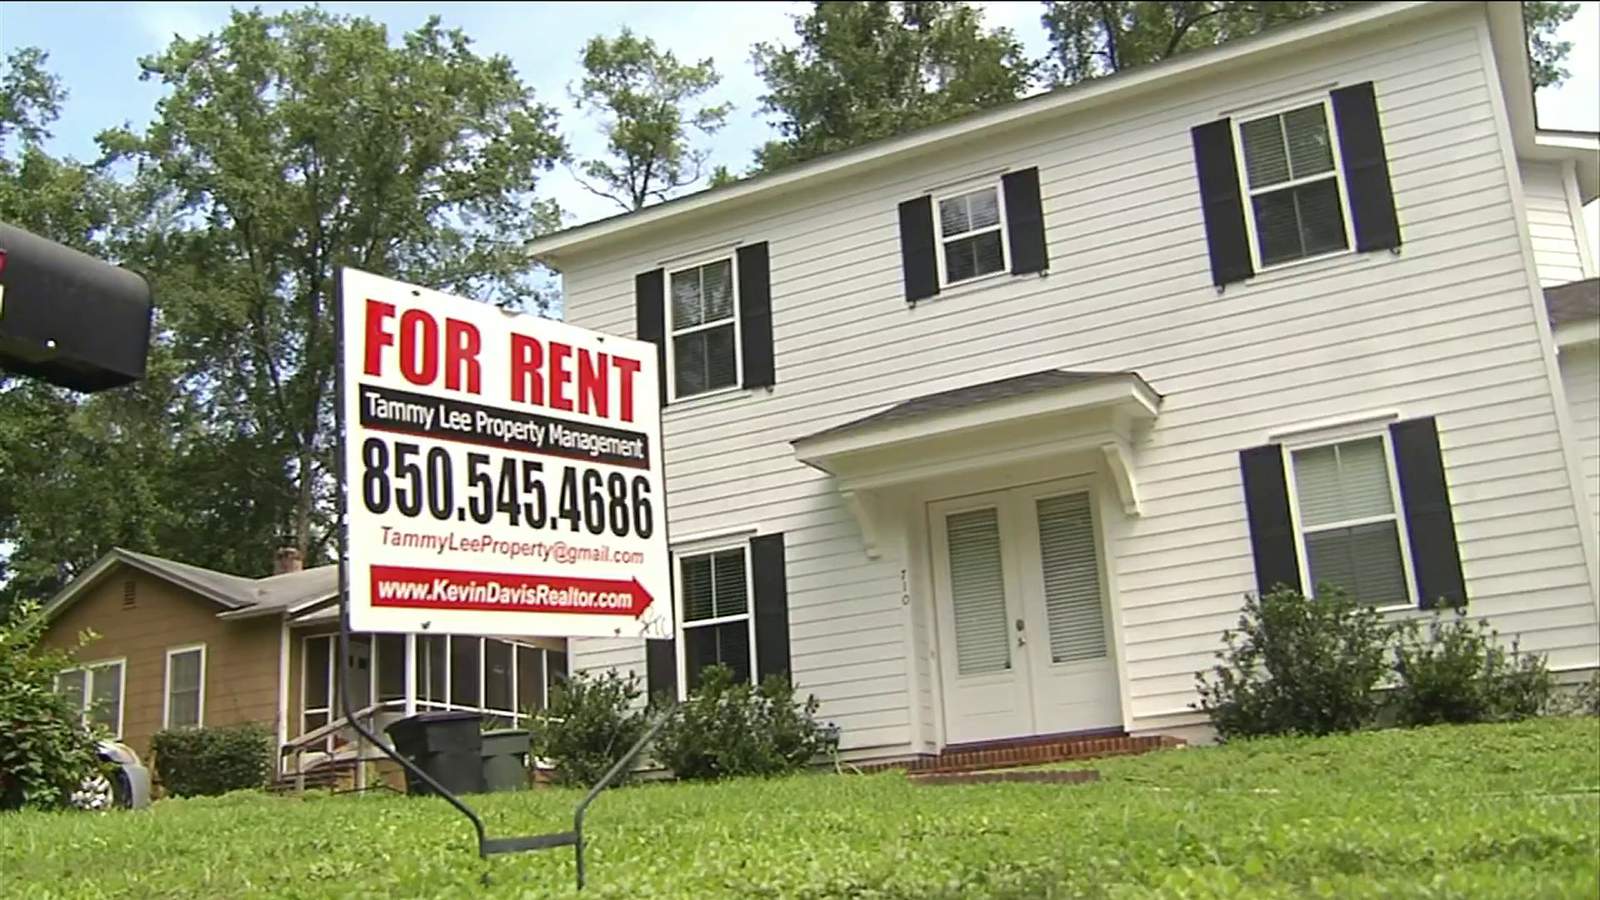 Florida lawmakers seek to slow down evictions